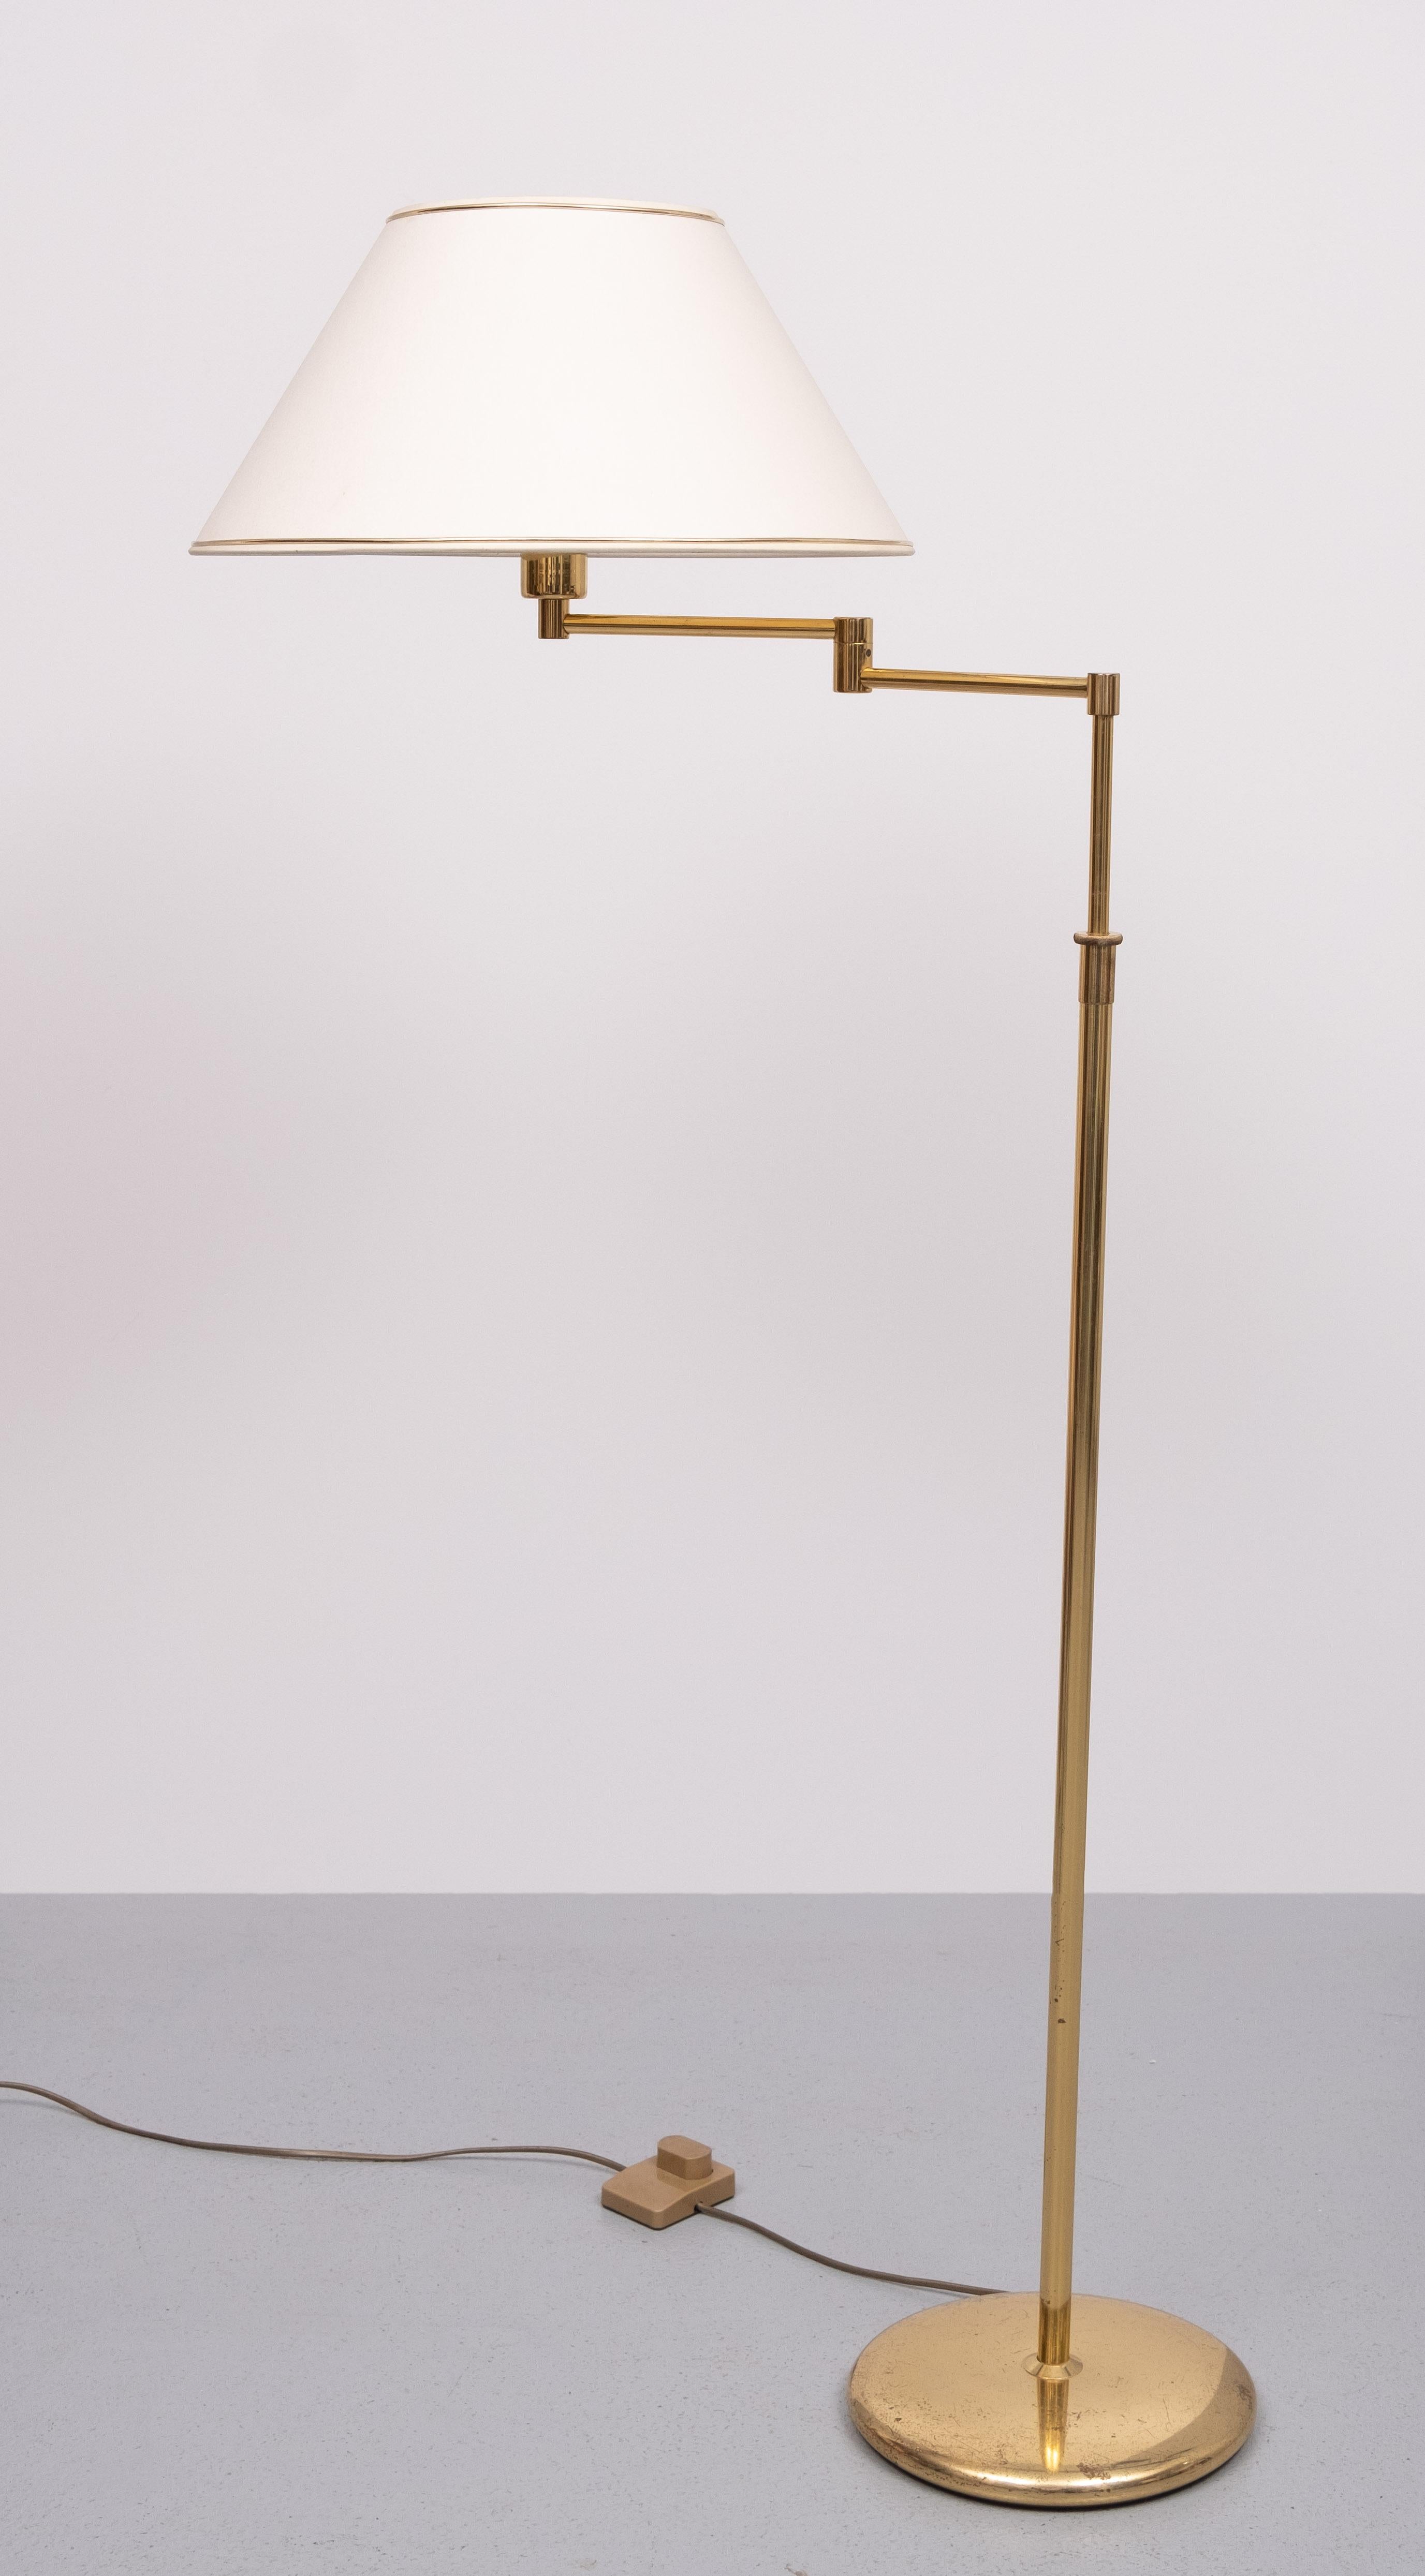 Mid-Century Modern Brass swing arm Floor lamp with shade  .1970s Germany  For Sale